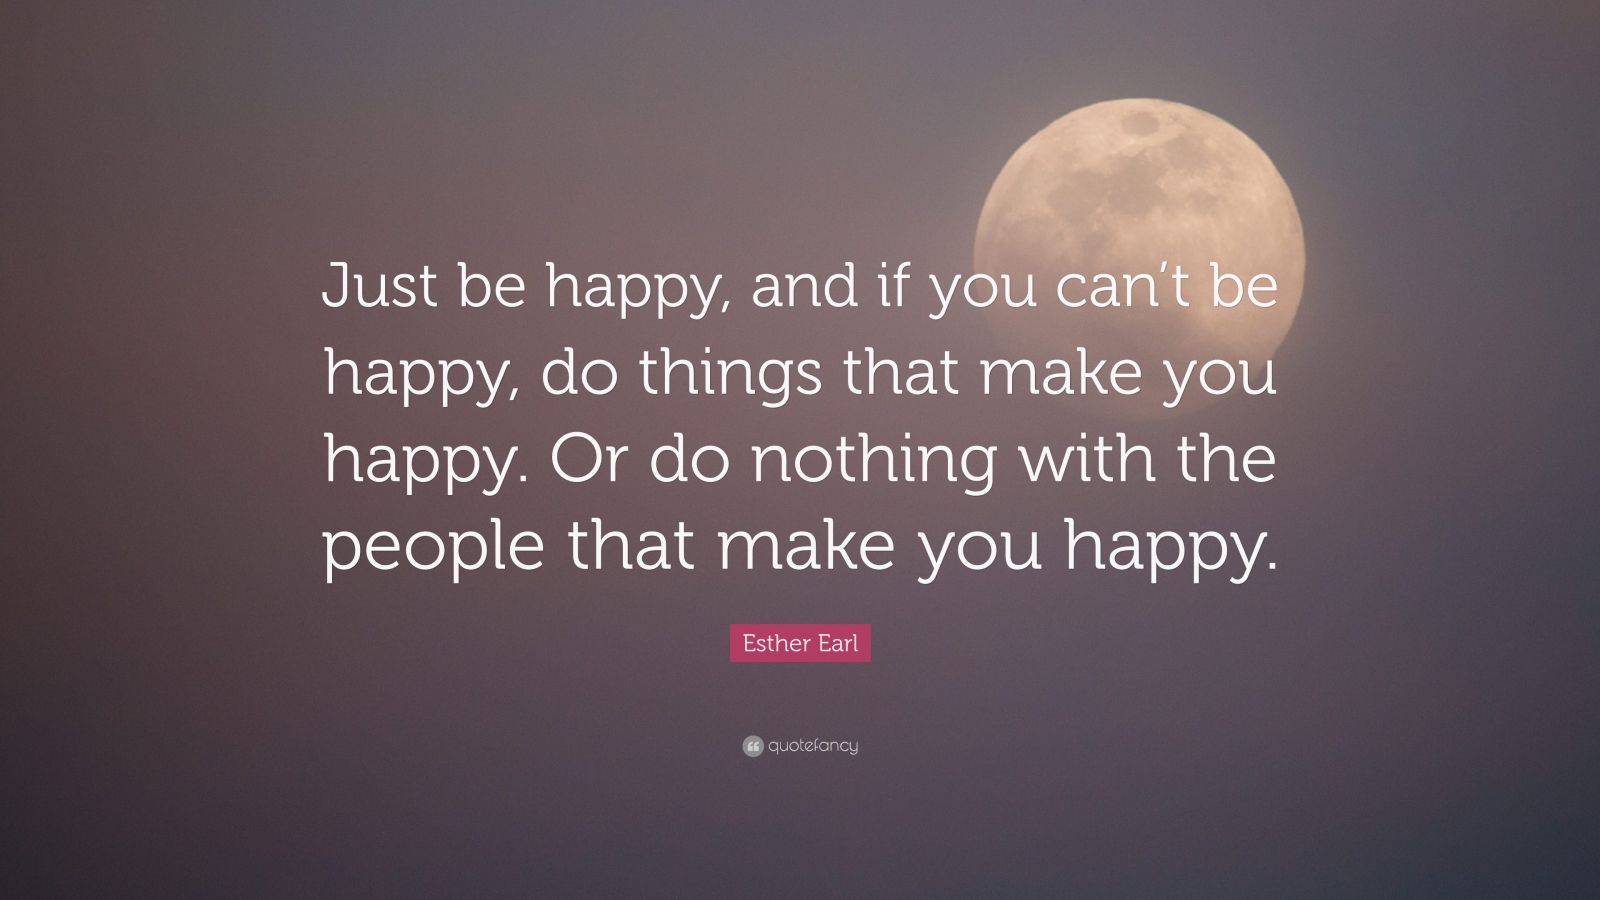 Esther Earl Quote: “Just be happy, and if you can’t be happy, do things ...